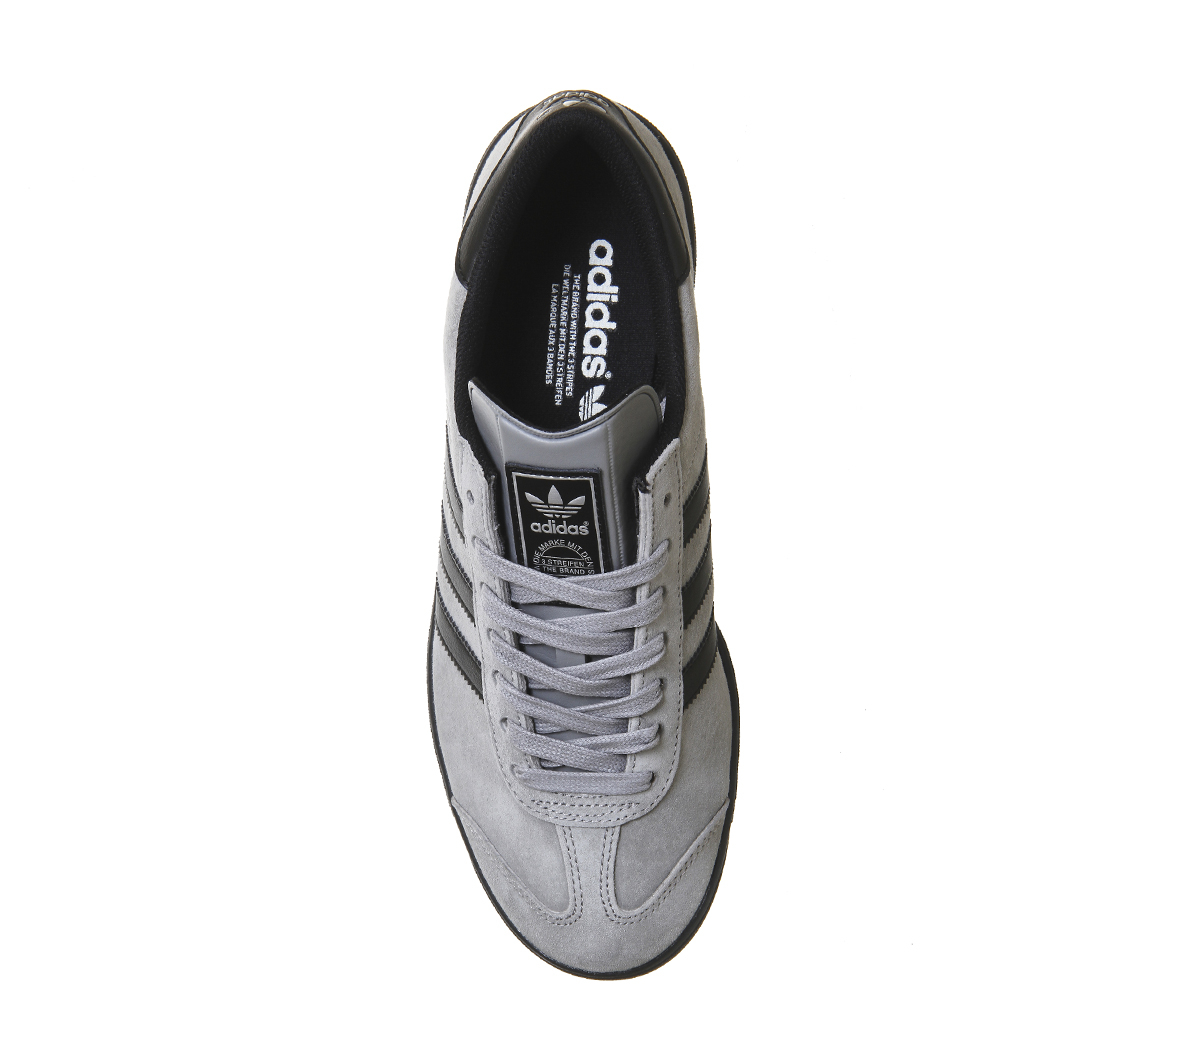 adidas Originals Hamburg Suede and Leather Low-Top Sneakers in Grey (Gray)  for Men - Lyst